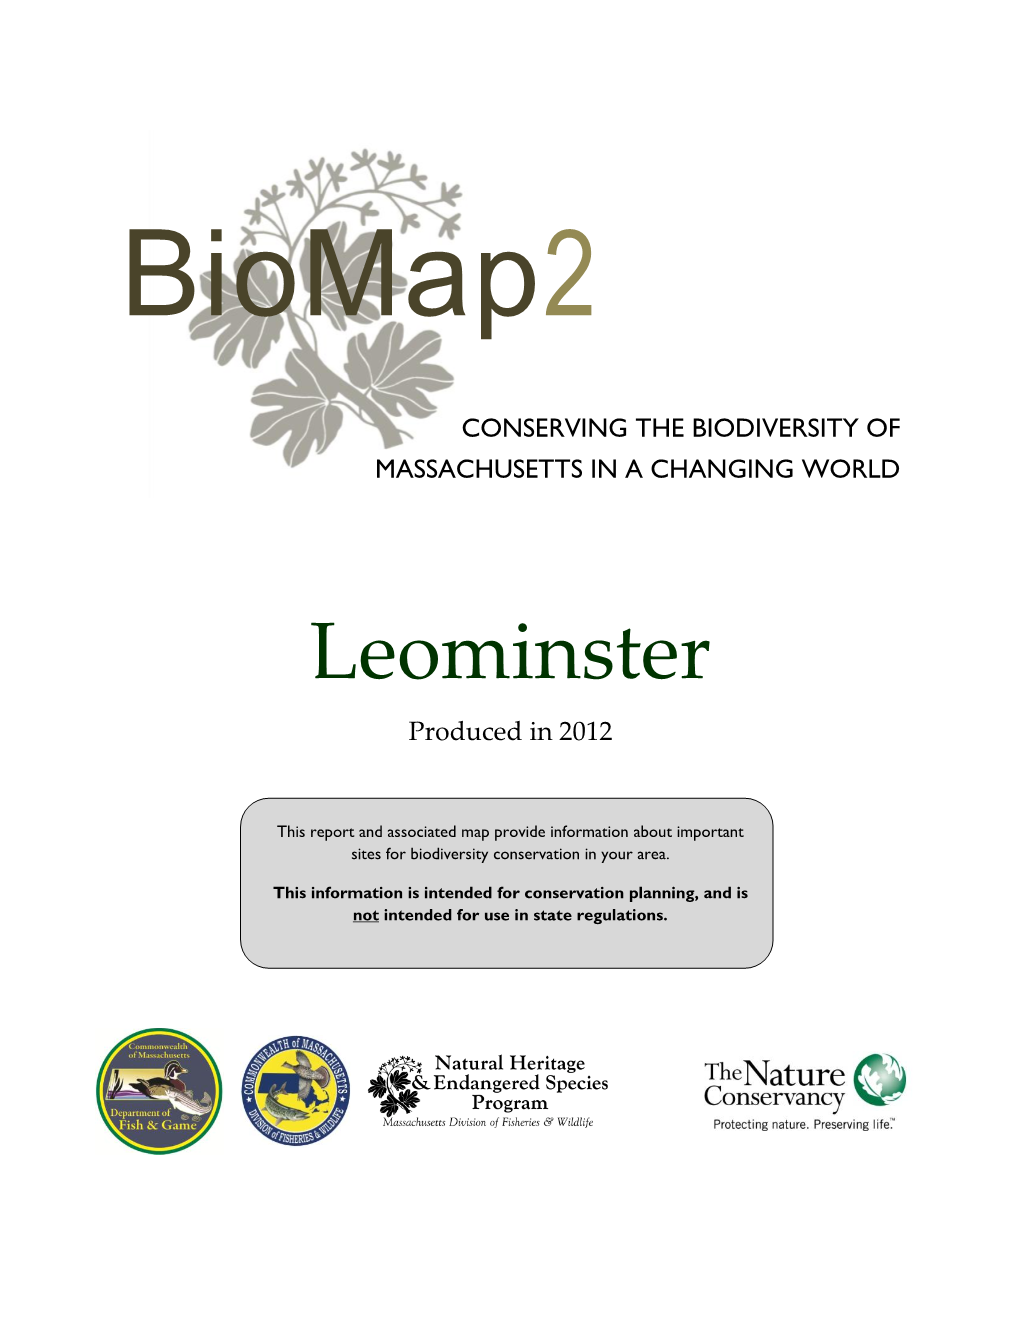 Leominster Produced in 2012